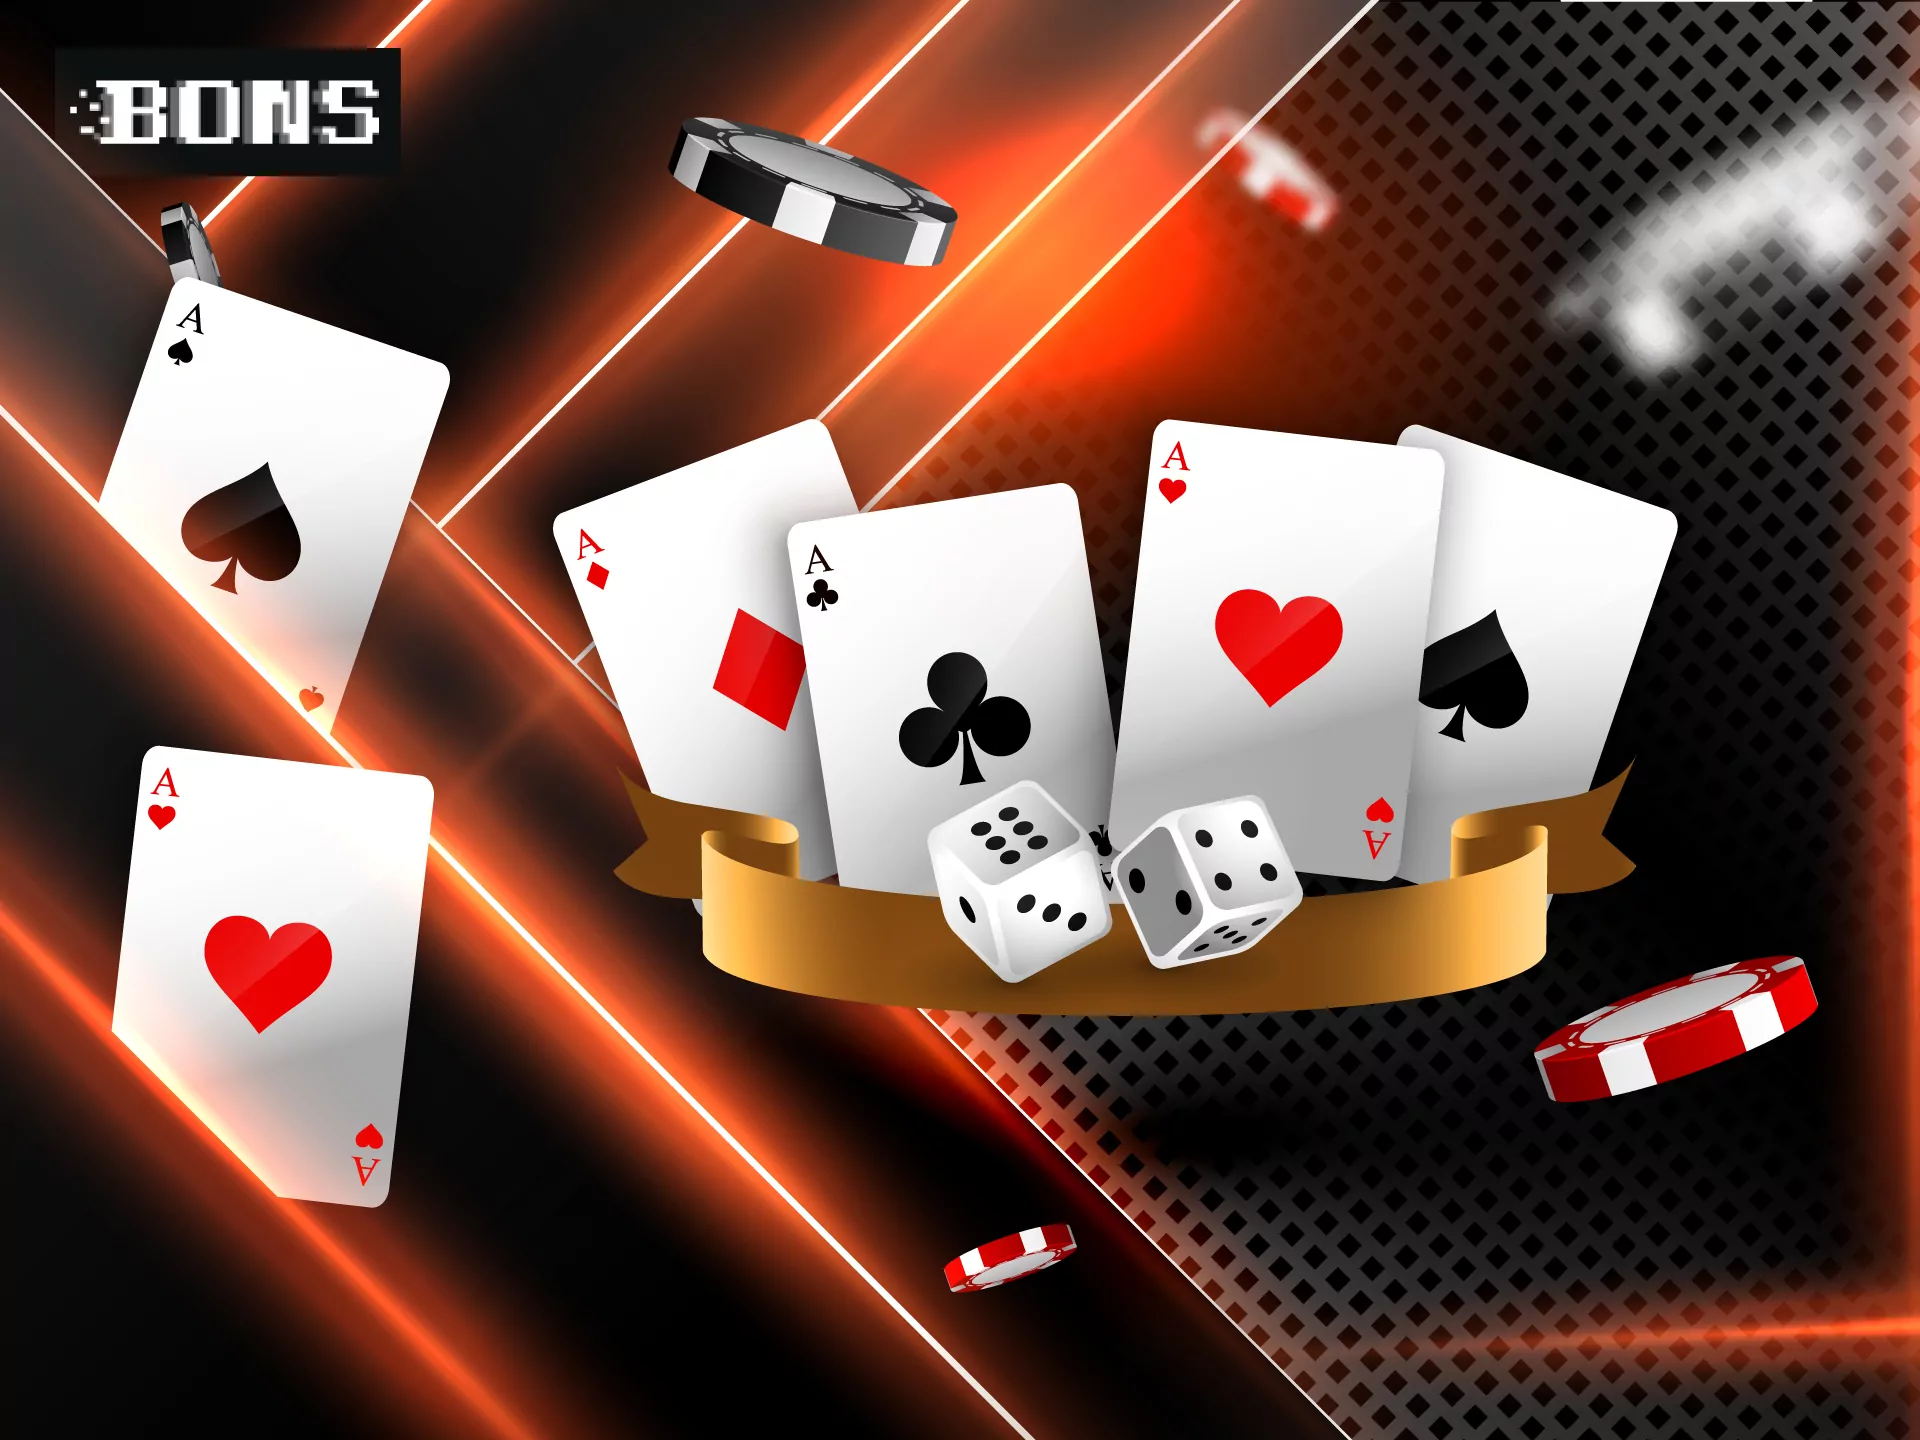 You will find a lot of popular casino games in the Bons mobile casino.